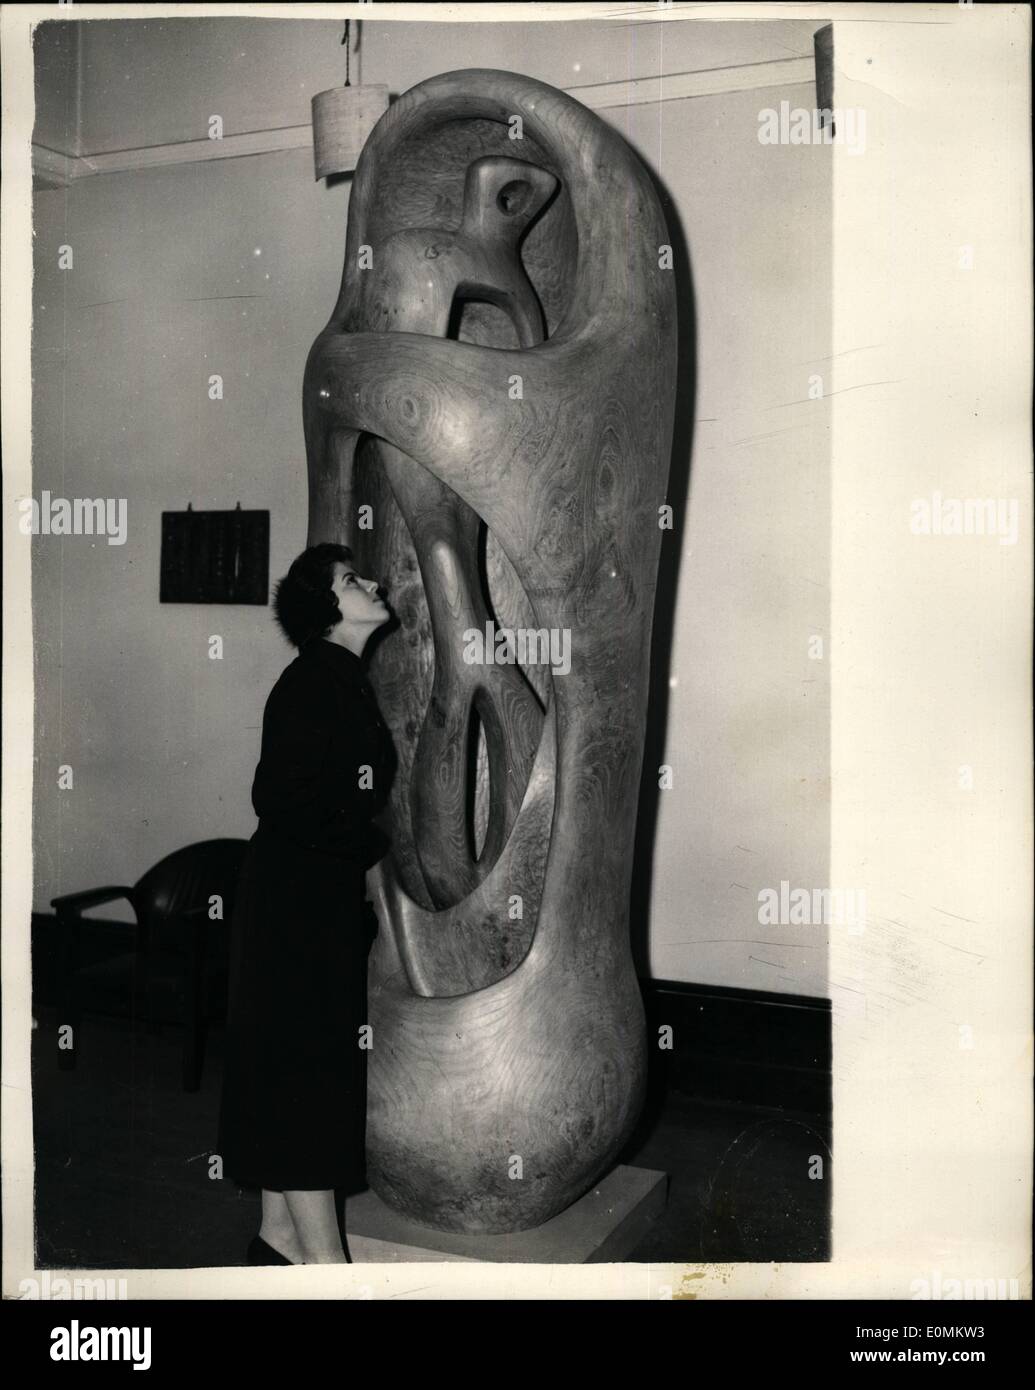 Oct. 10, 1955 - Exhibition Of Recent Sculpture By Henry Moore At Leicester Galleries: An exhibition of recent sculpture by Henry Moore, opens today at the Leicester Galleries. Photo Shows Sally Winkleman, of Hampstead looking at Henry Moore's ''Upright Exterior and Interior forms'' - win elm wood - at this morning's private view. Stock Photo